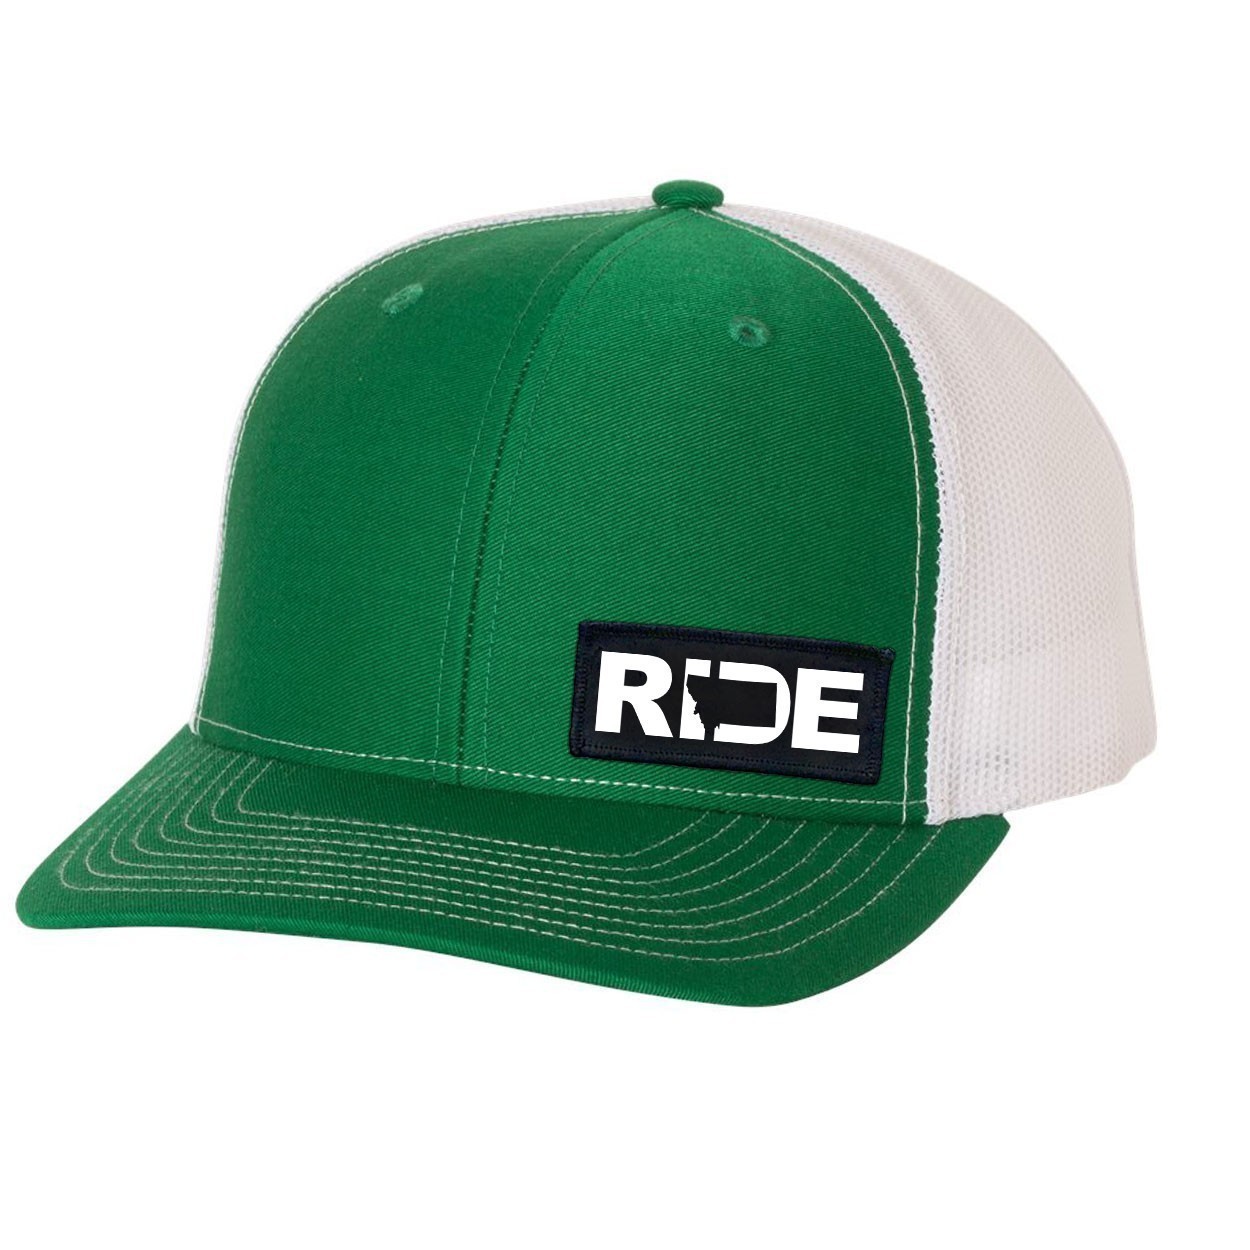 Ride Montana Night Out Woven Patch Snapback Trucker Hat Green/White (White Logo)